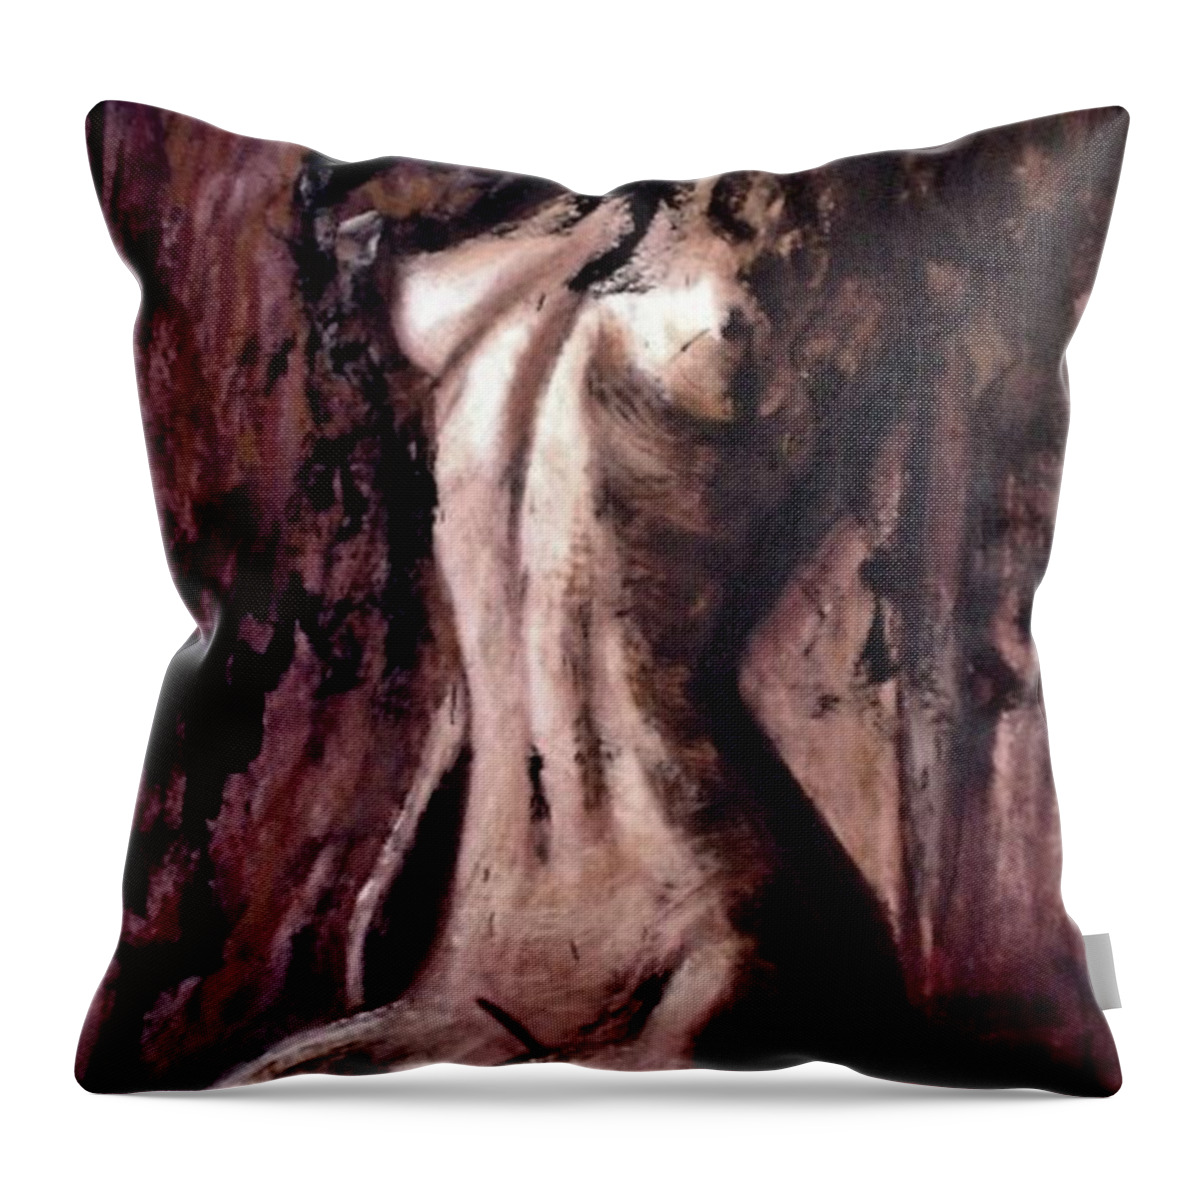 Beautiful Throw Pillow featuring the painting Red Red Wine by Jarmo Korhonen aka Jarko